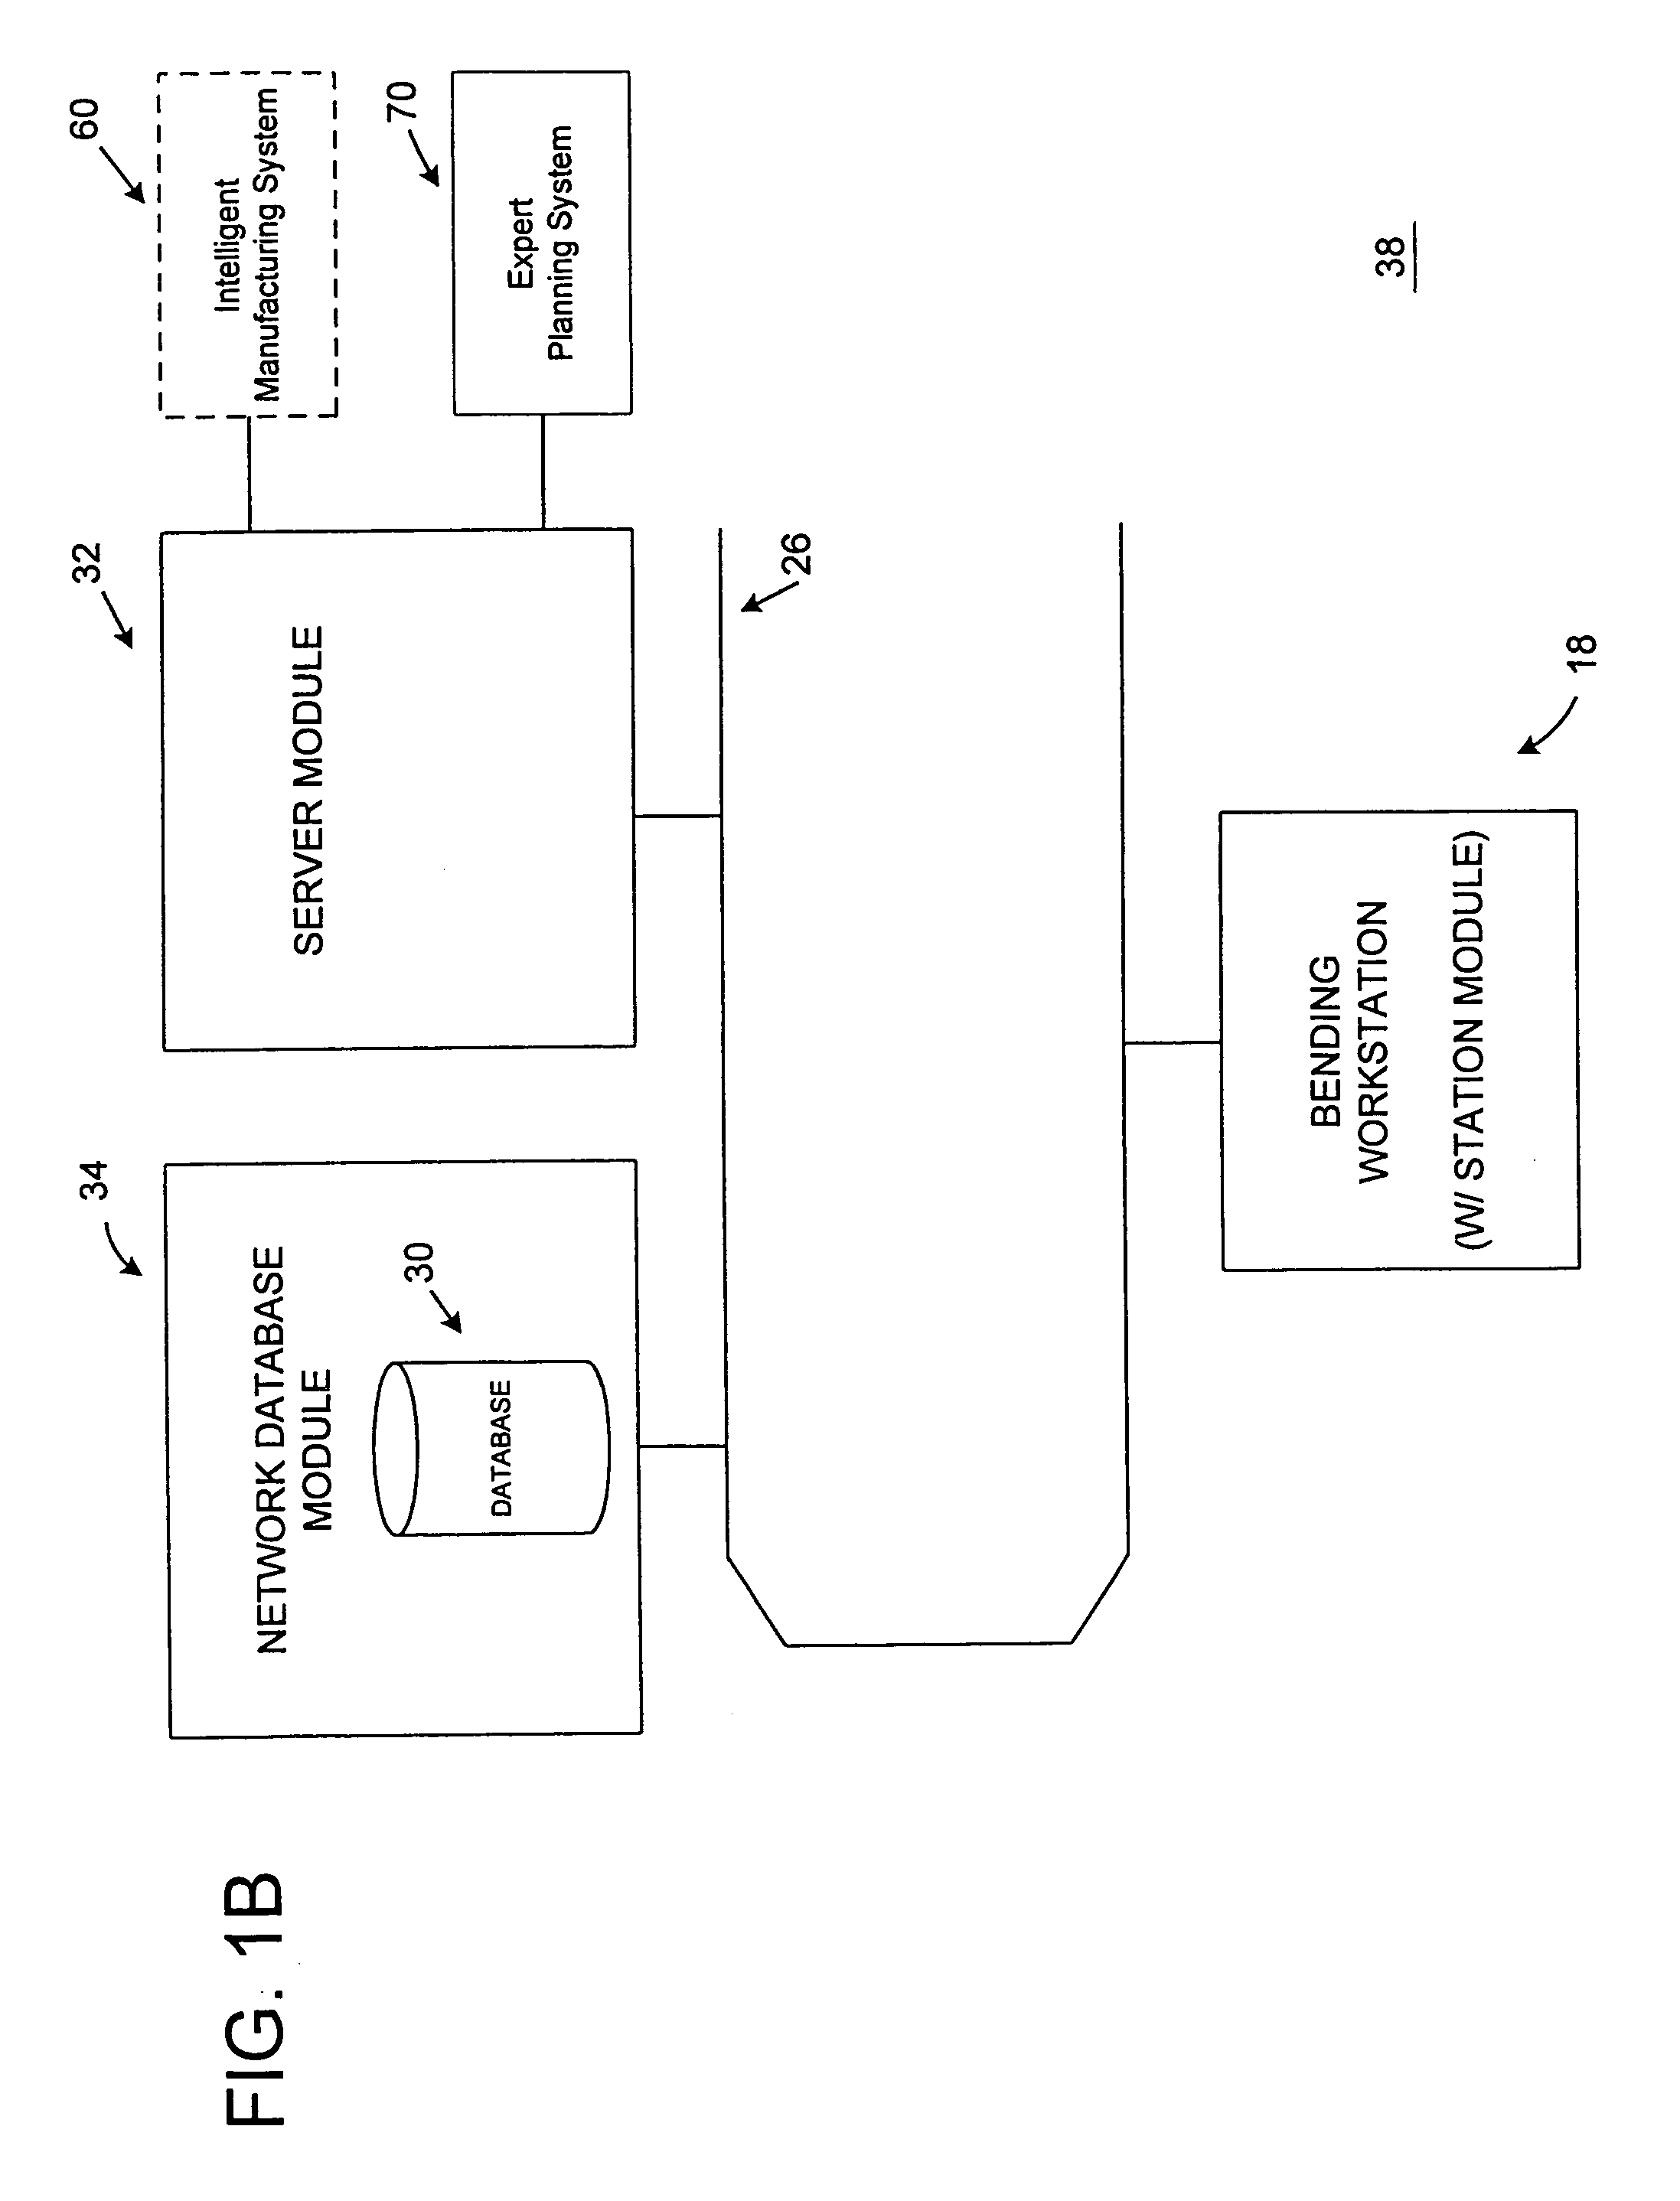 Apparatus and method for multi-part setup planning for sheet metal bending operations